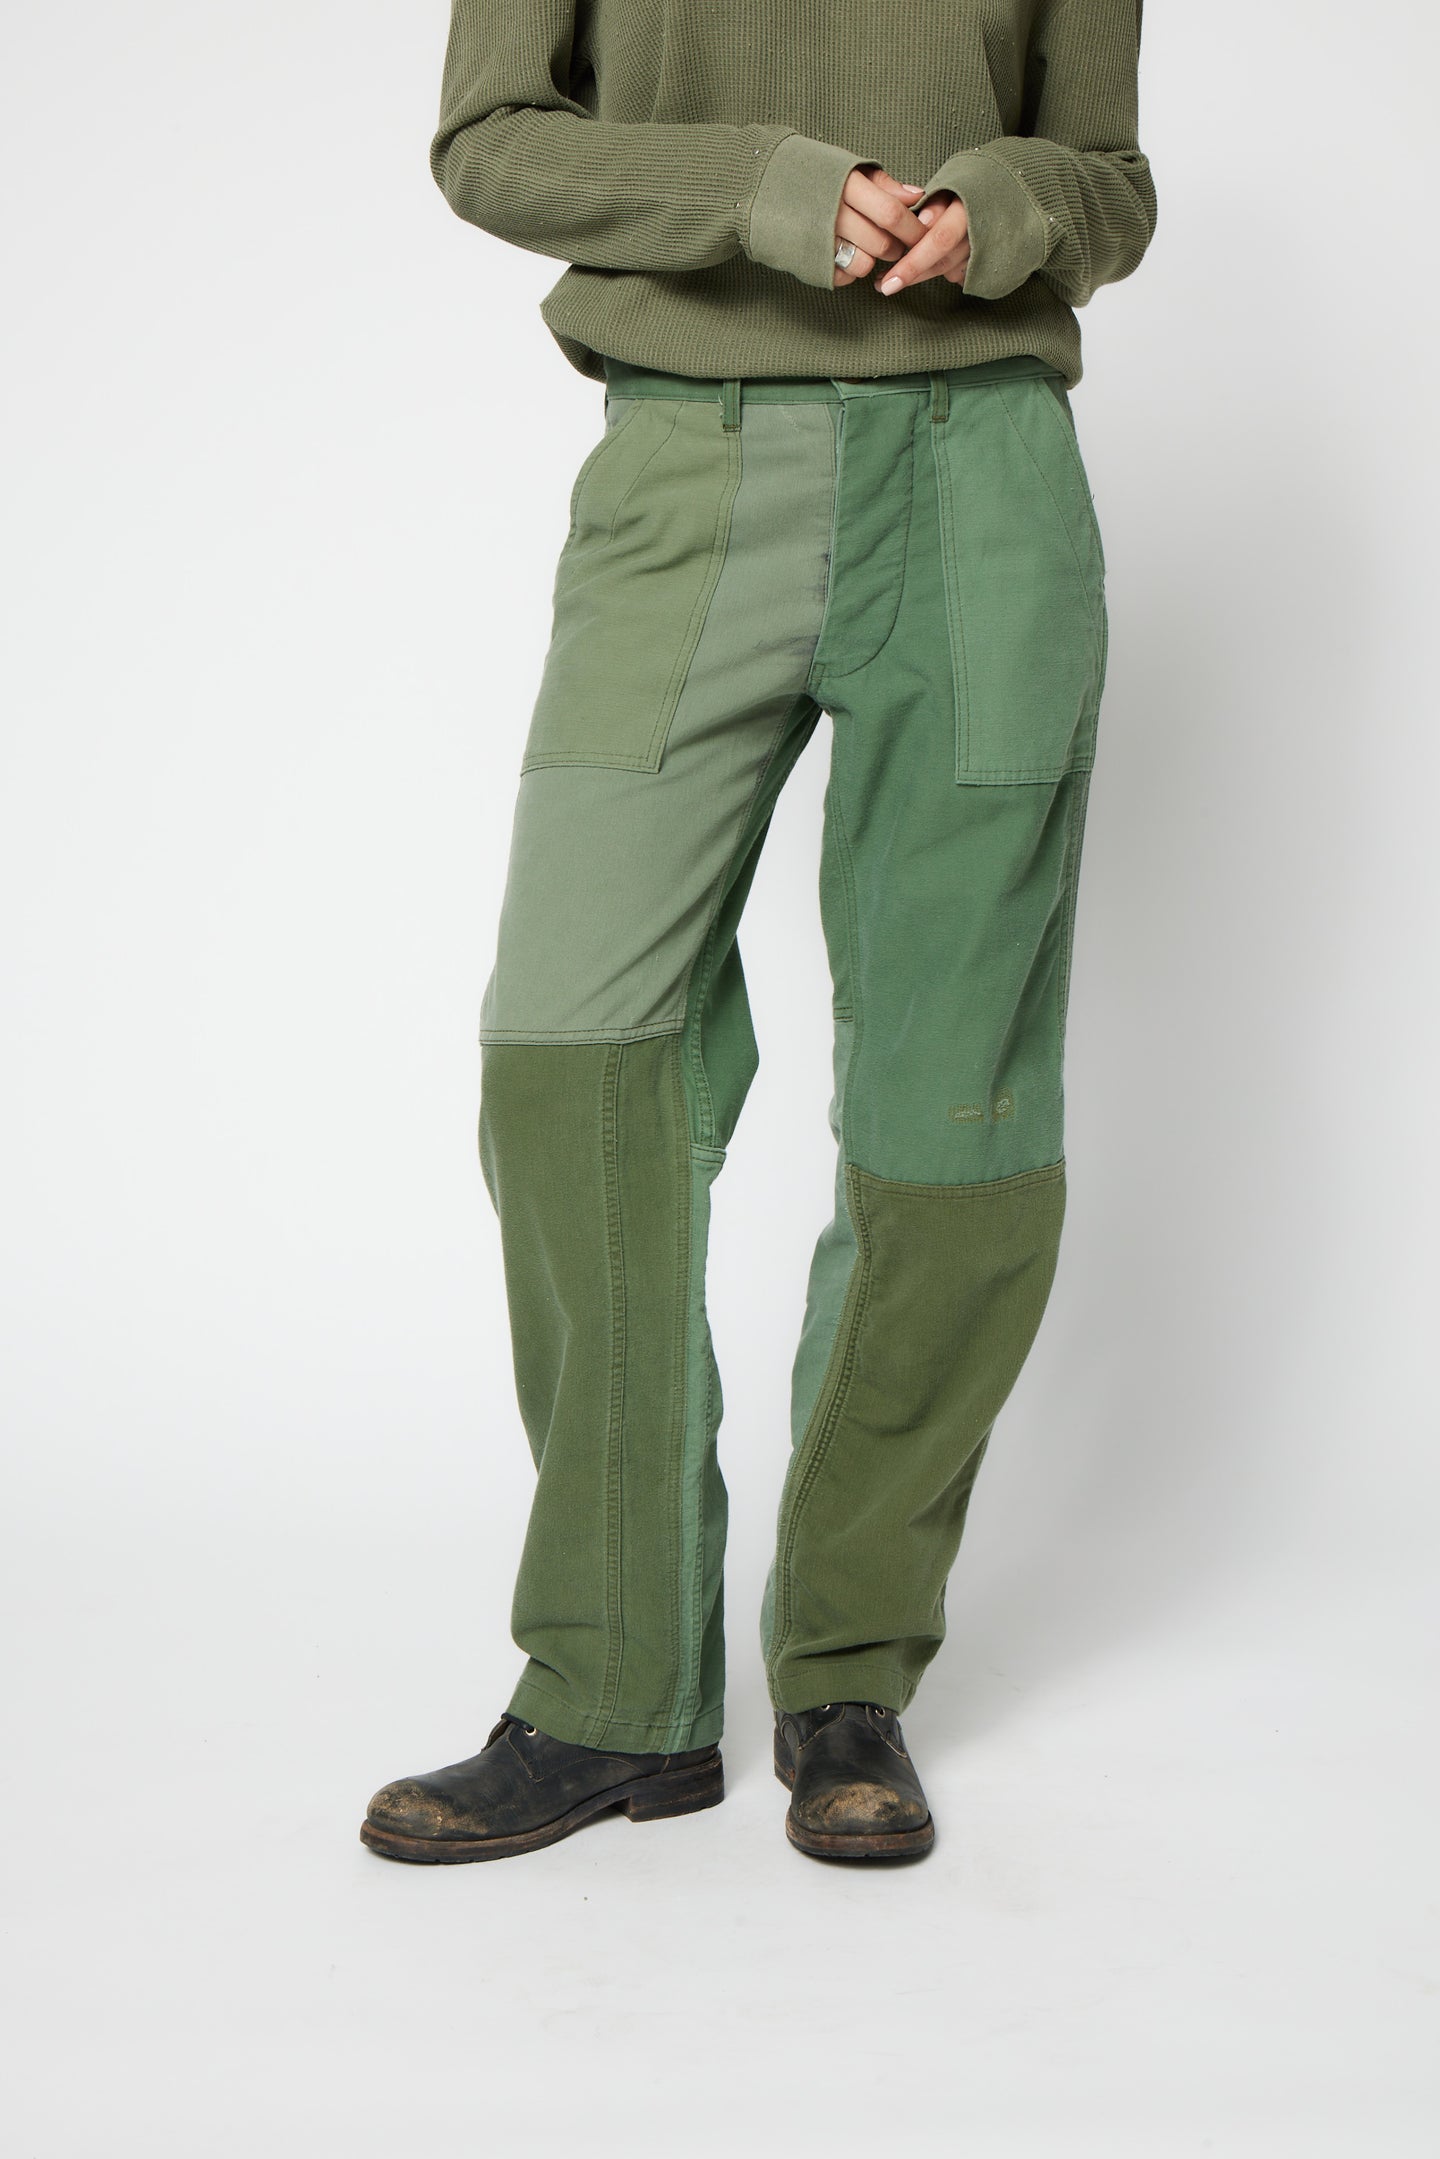 SRPLS MILITARY PATCH BAKER PANT / ARMY PATCHWORK